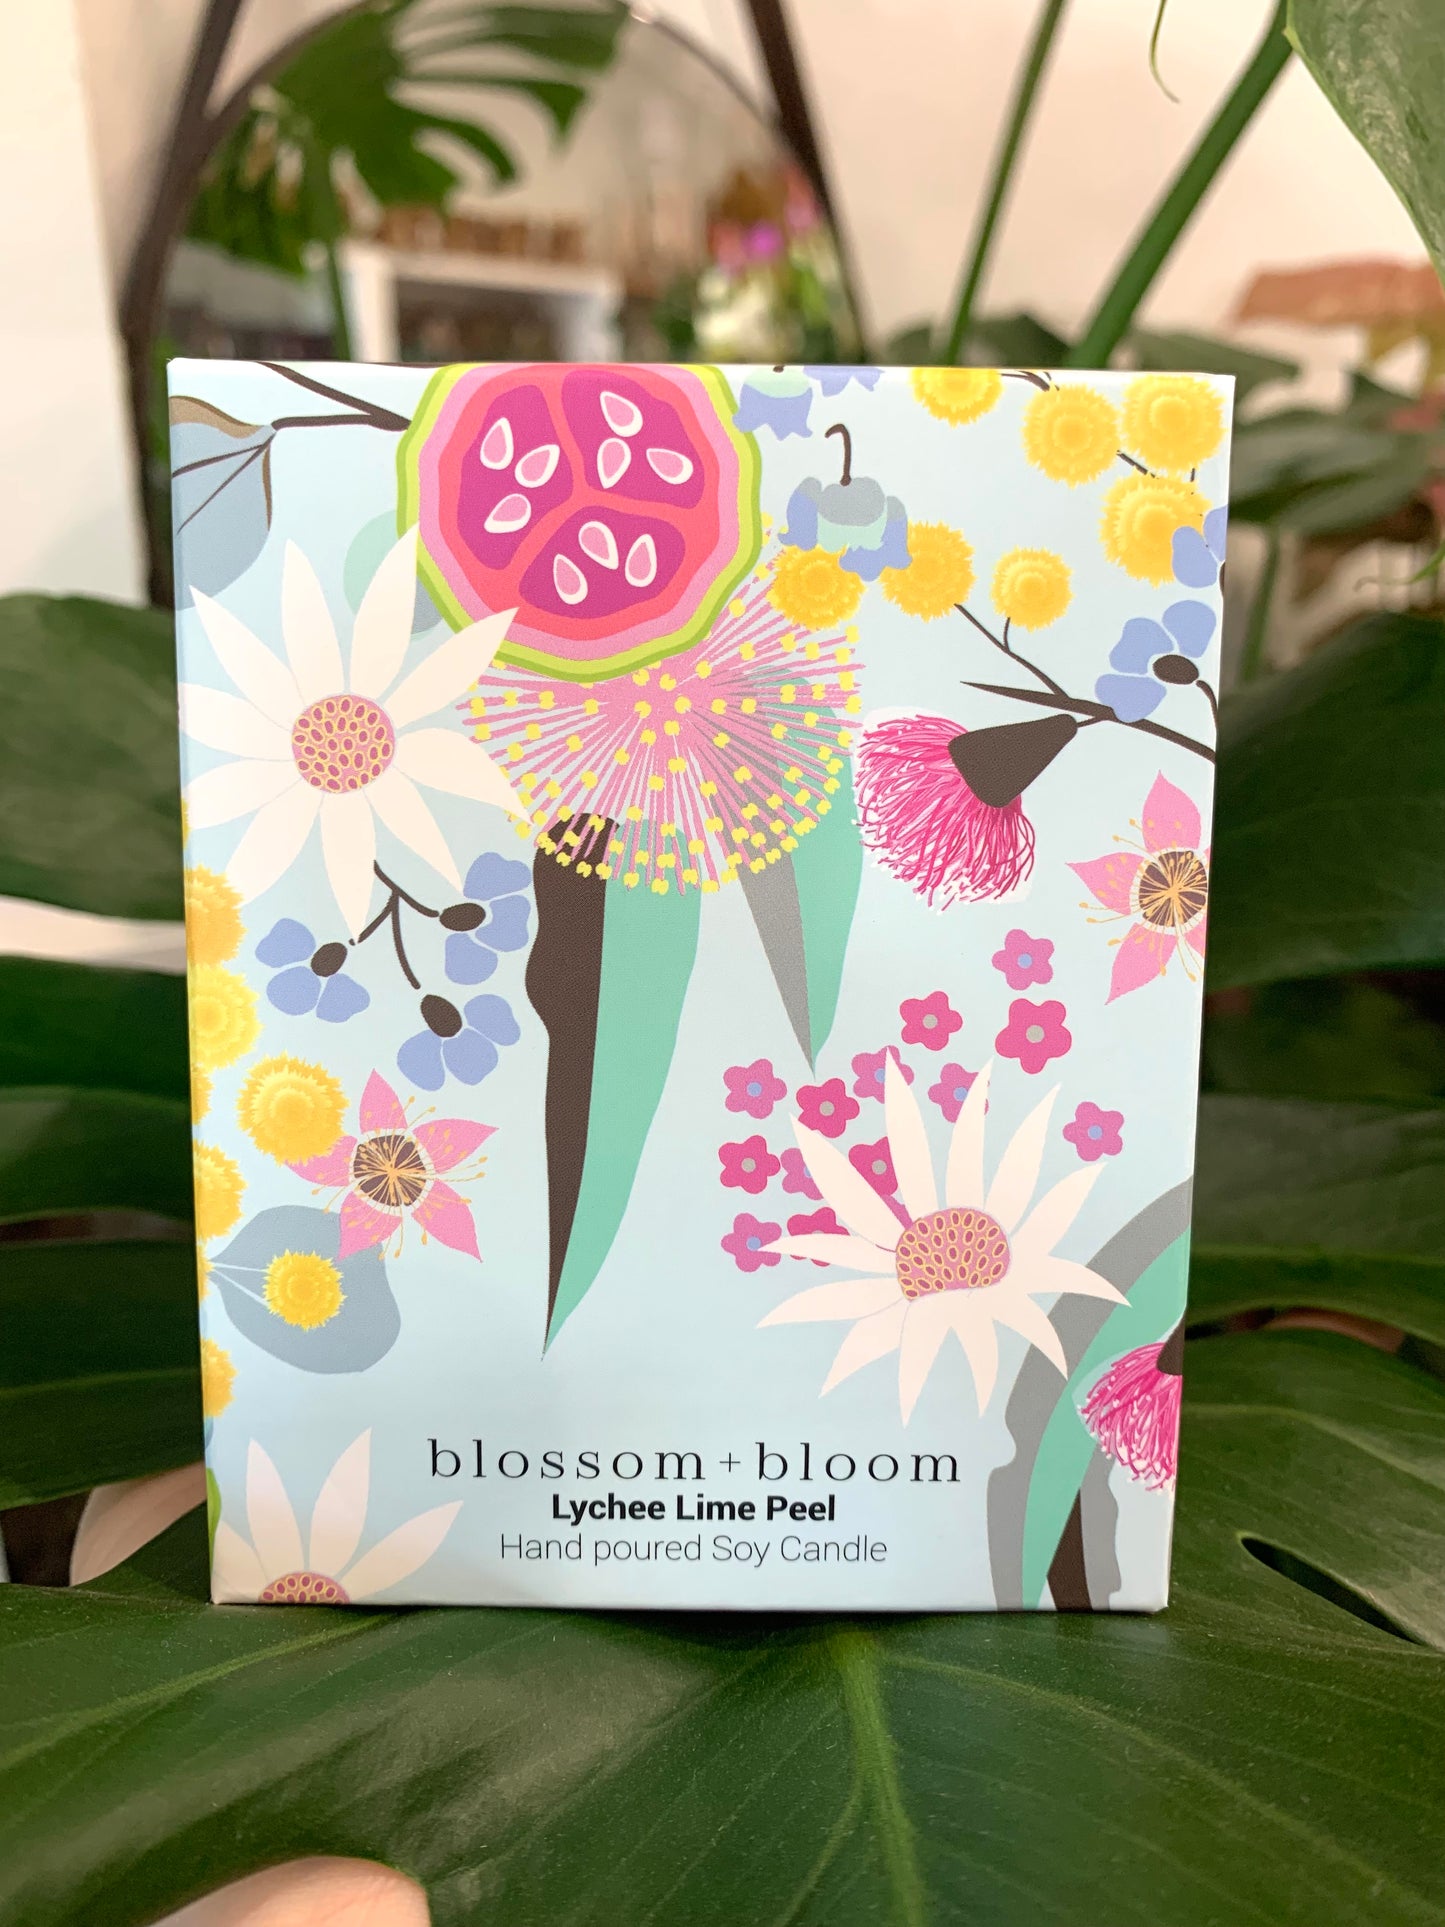 Blossom & bloom hand poured soy candle